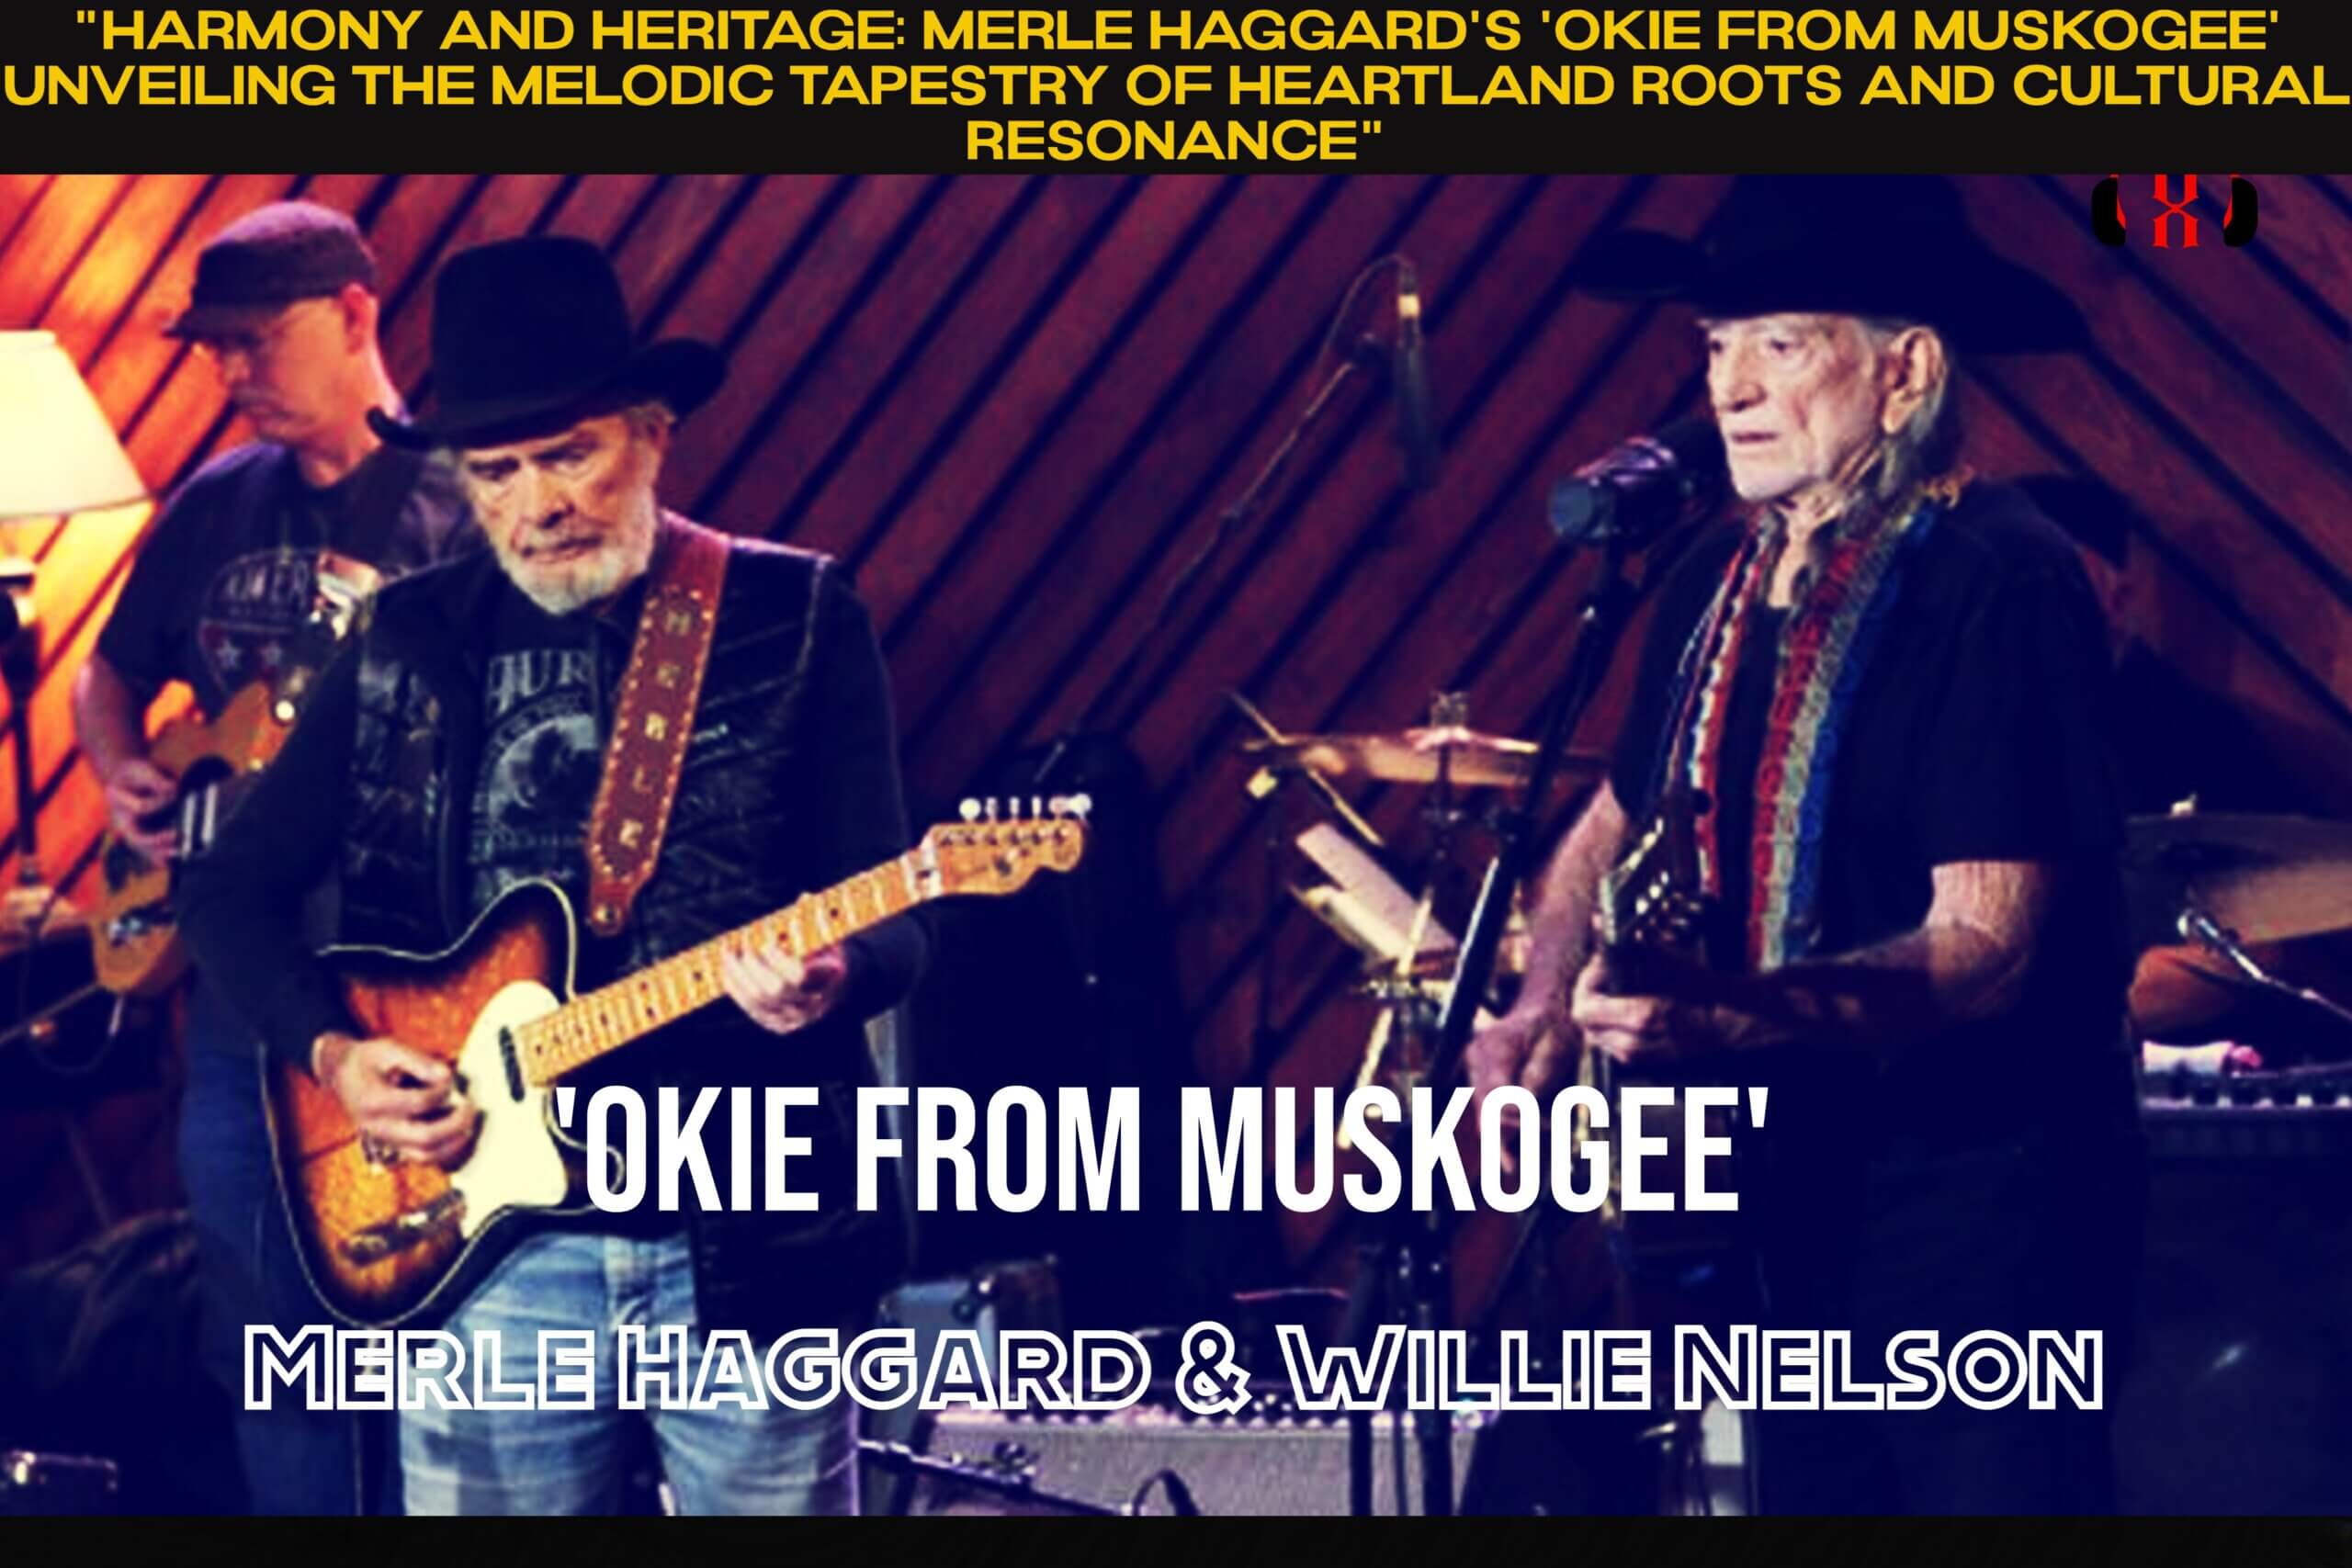 “Harmony and Heritage: Merle Haggard’s ‘Okie From Muskogee’ Unveiling the Melodic Tapestry of Heartland Roots and Cultural Resonance”